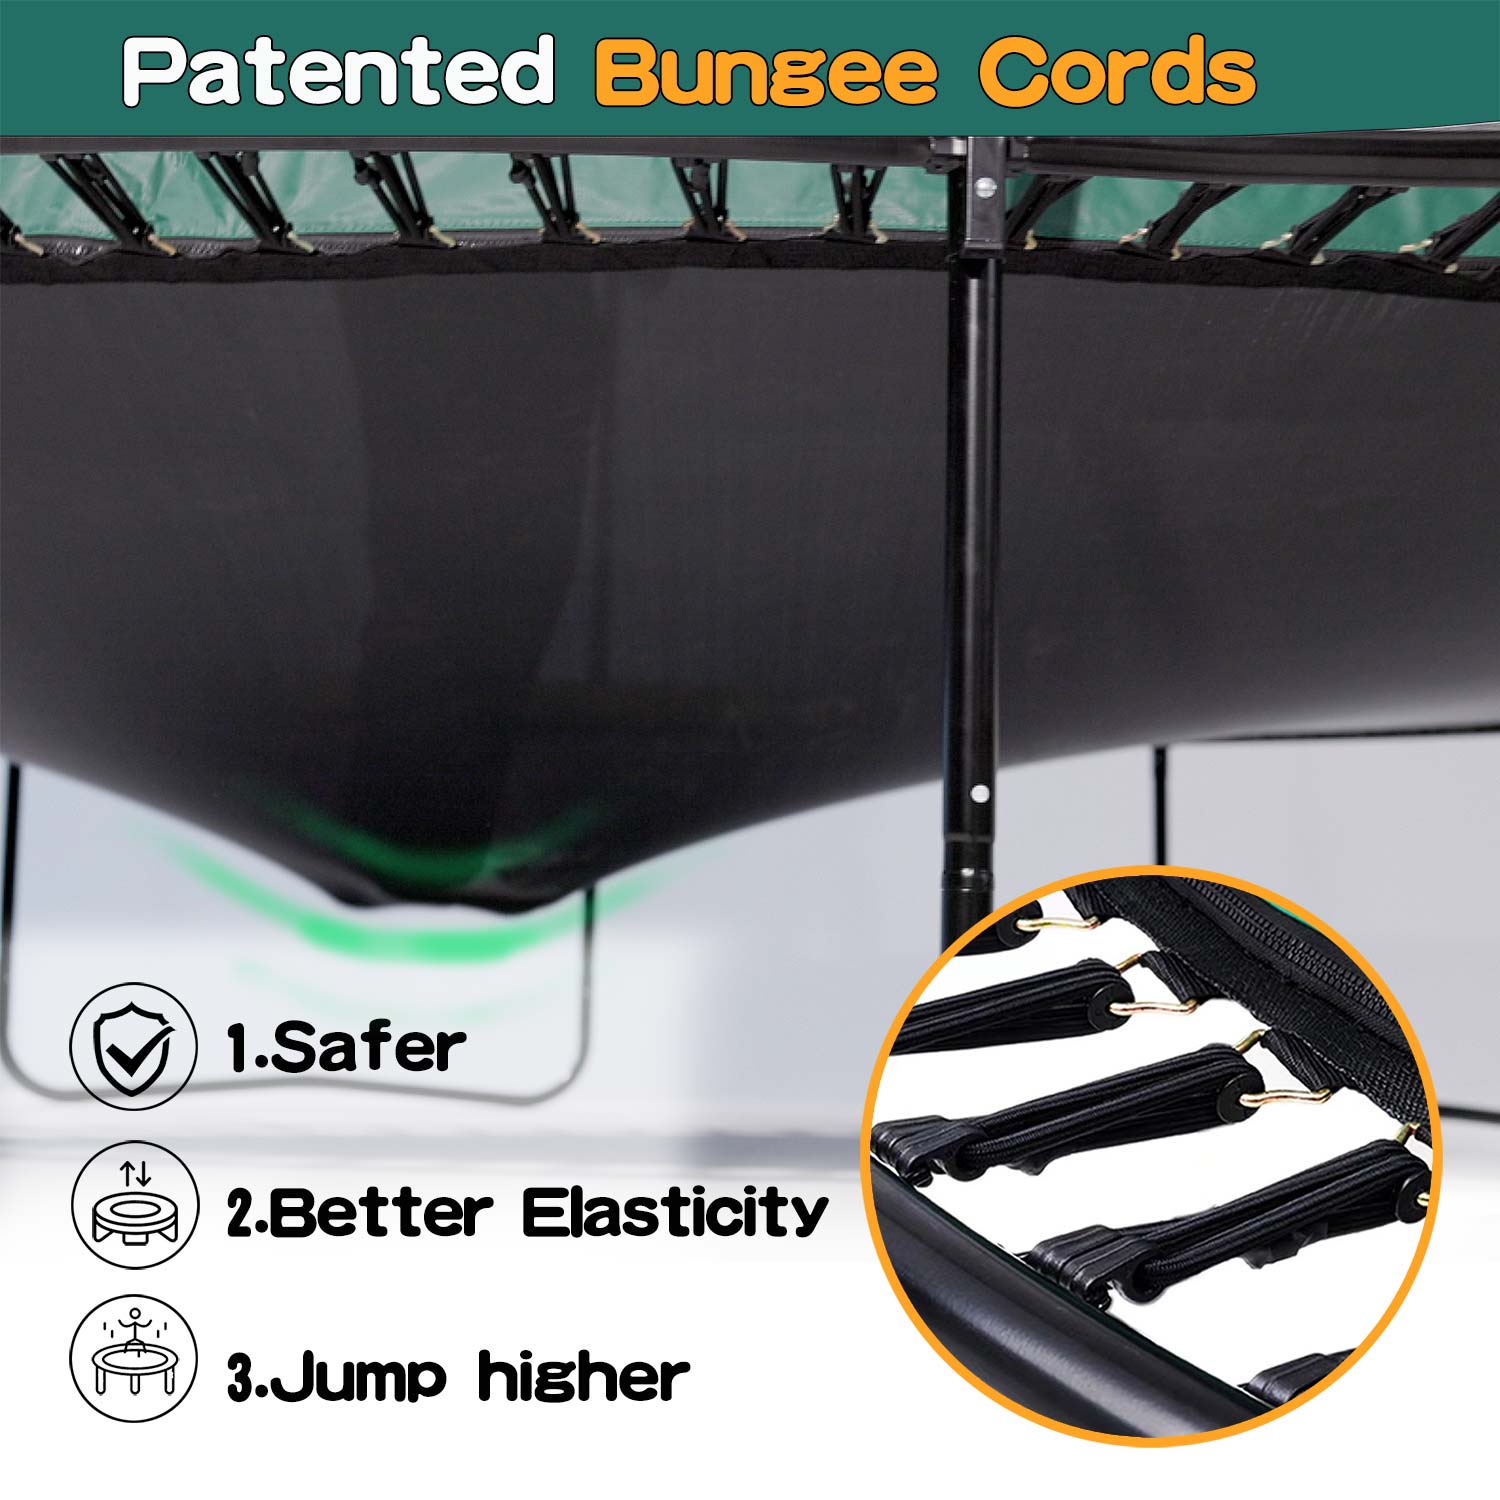 Title: Patent Bungee Cord, Above, there is a highly elastic trampoline jumping cloth on display. Below, there is a detailed image of the bungee cord, with "Safety, Better Elasticity, Jump Higher" written next to it.